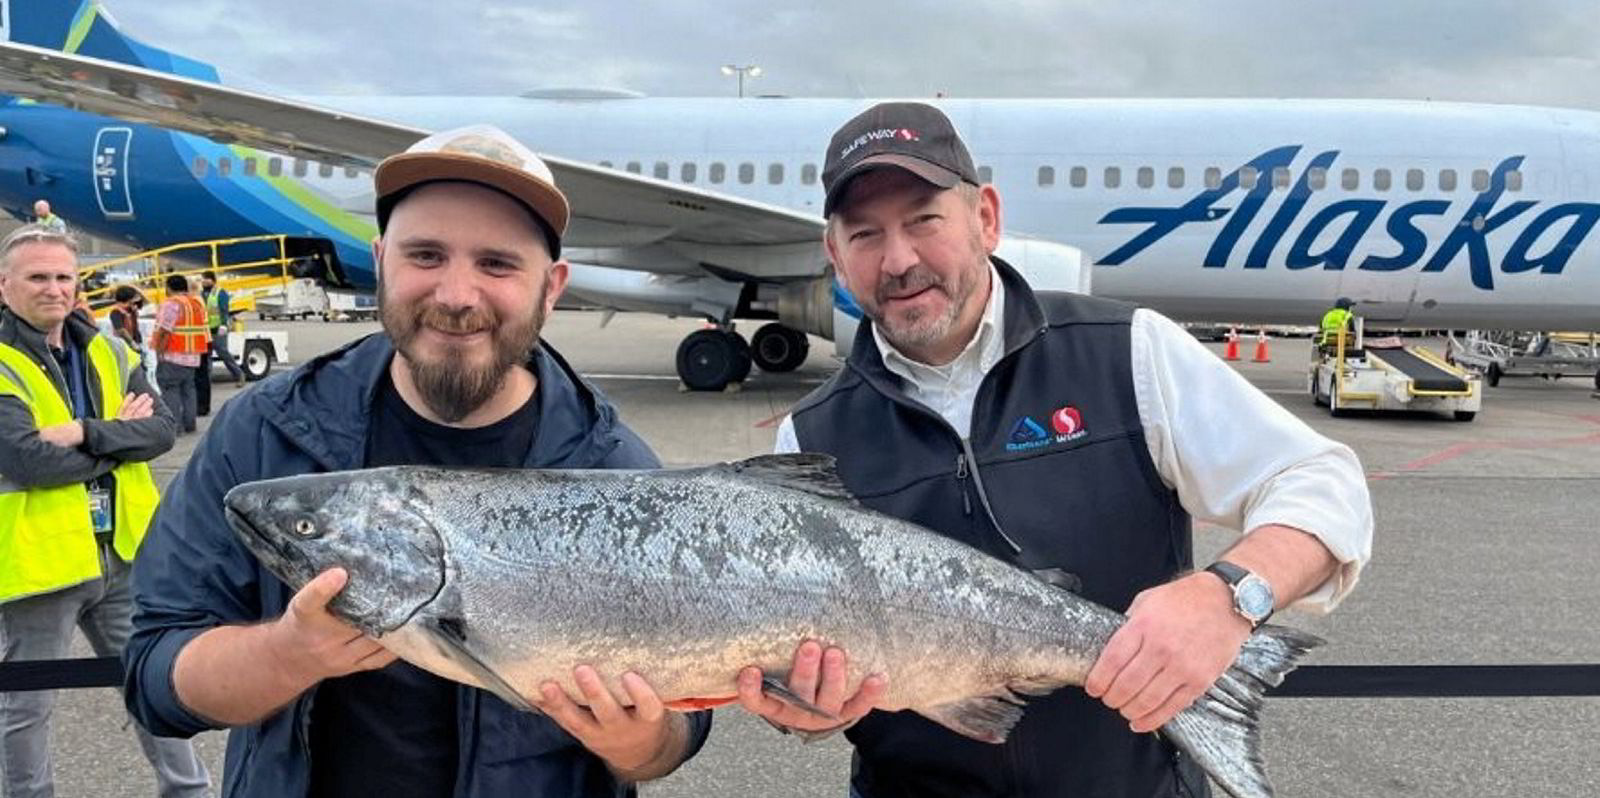 The first Copper River salmon prices are in; fish trickling into market